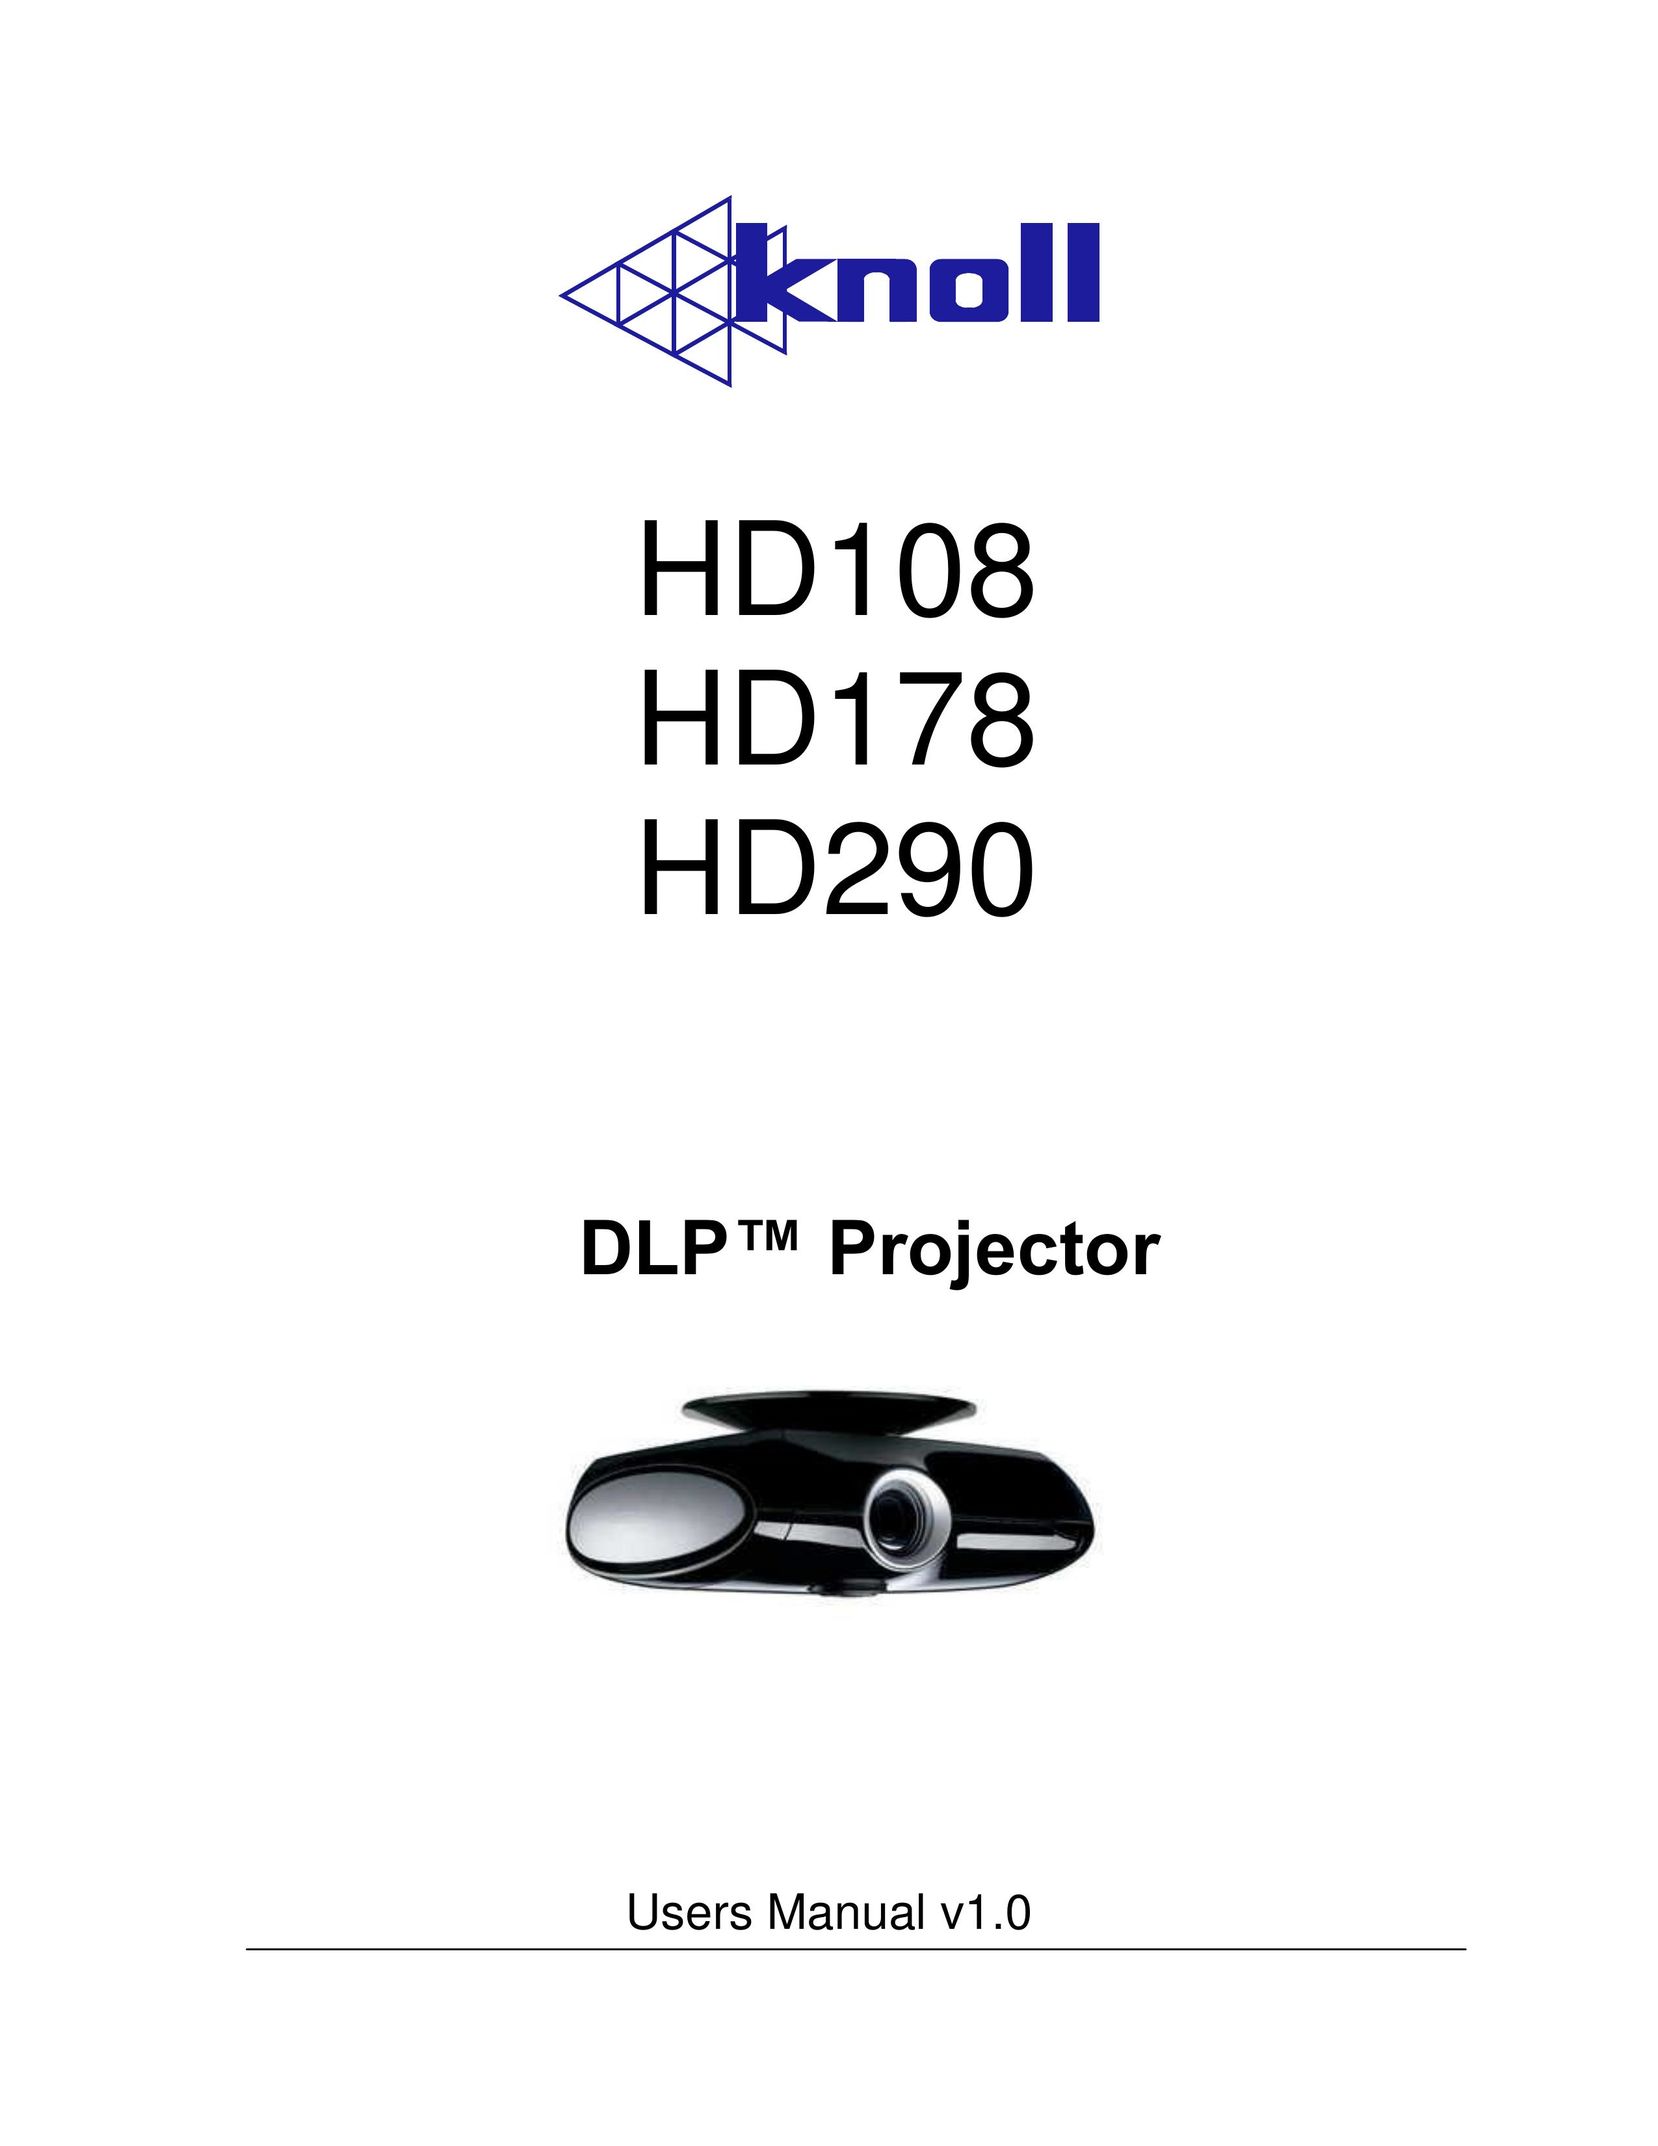 Knoll Systems HD290 Computer Accessories User Manual